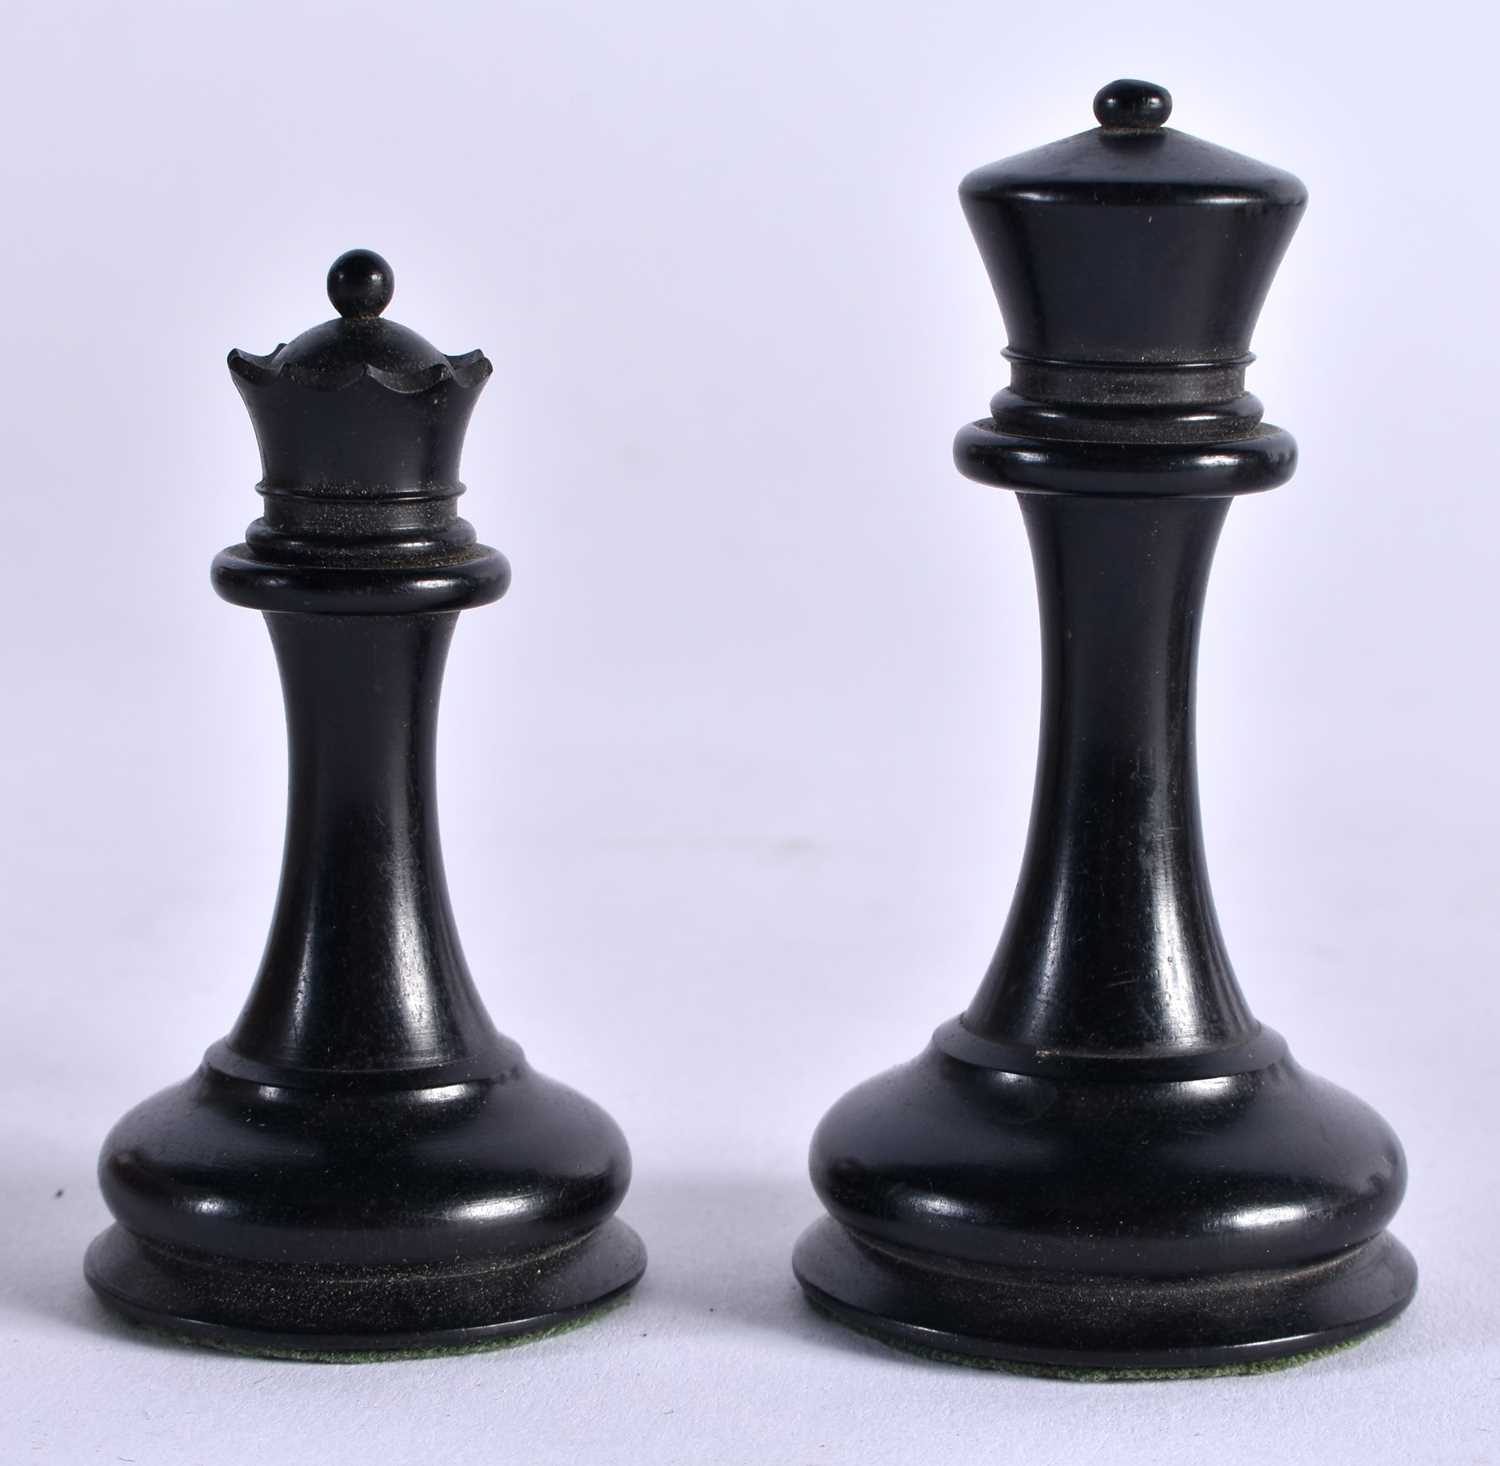 A LARGE ANTIQUE STAUNTON TYPE J JAQUES OF LONDON EBONY AND BOXWOOD CHESS SET (32 Pieces complete) - Image 22 of 44